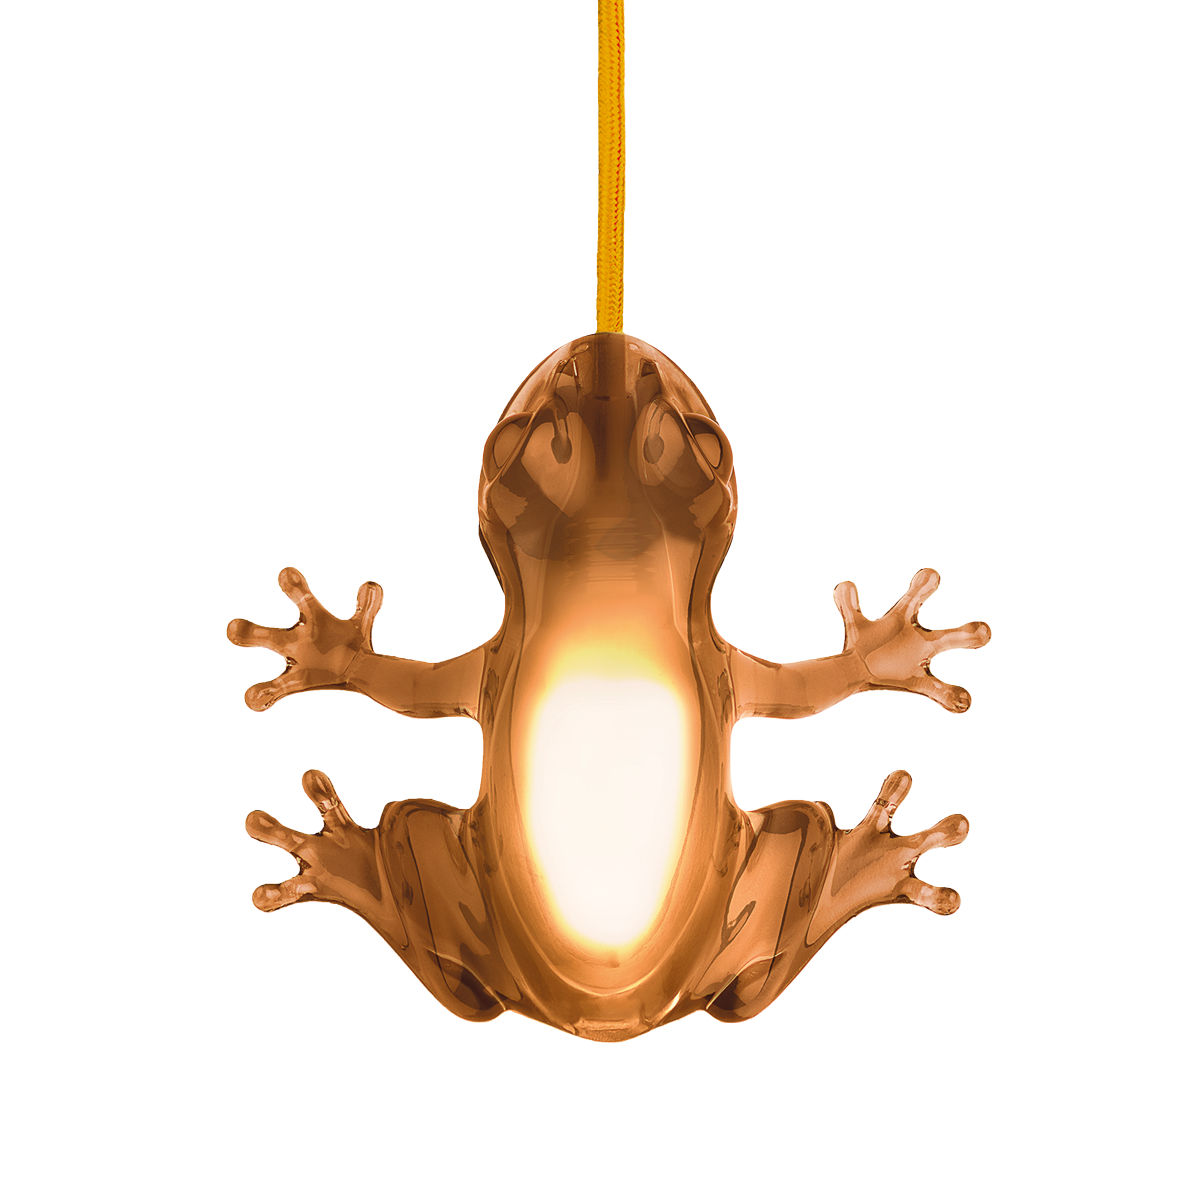 HUNGRY FROG LAMP